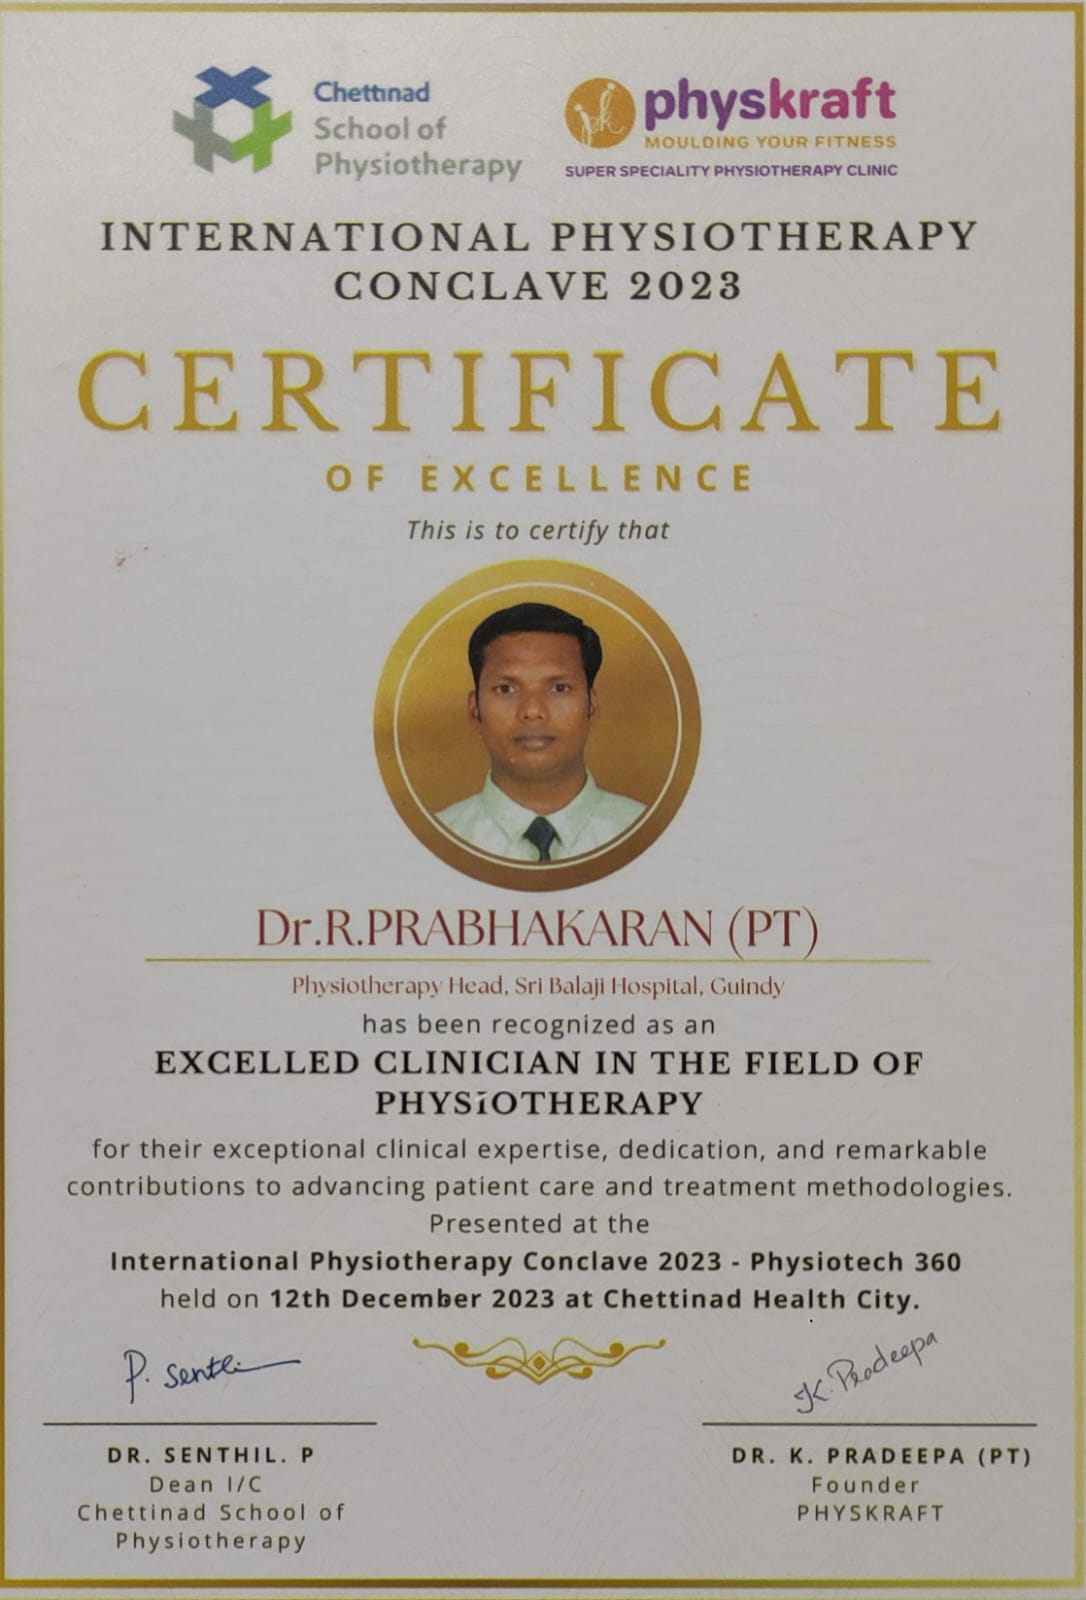 Certificate of Excellence awarded to Dr. R. Prabhakaran.